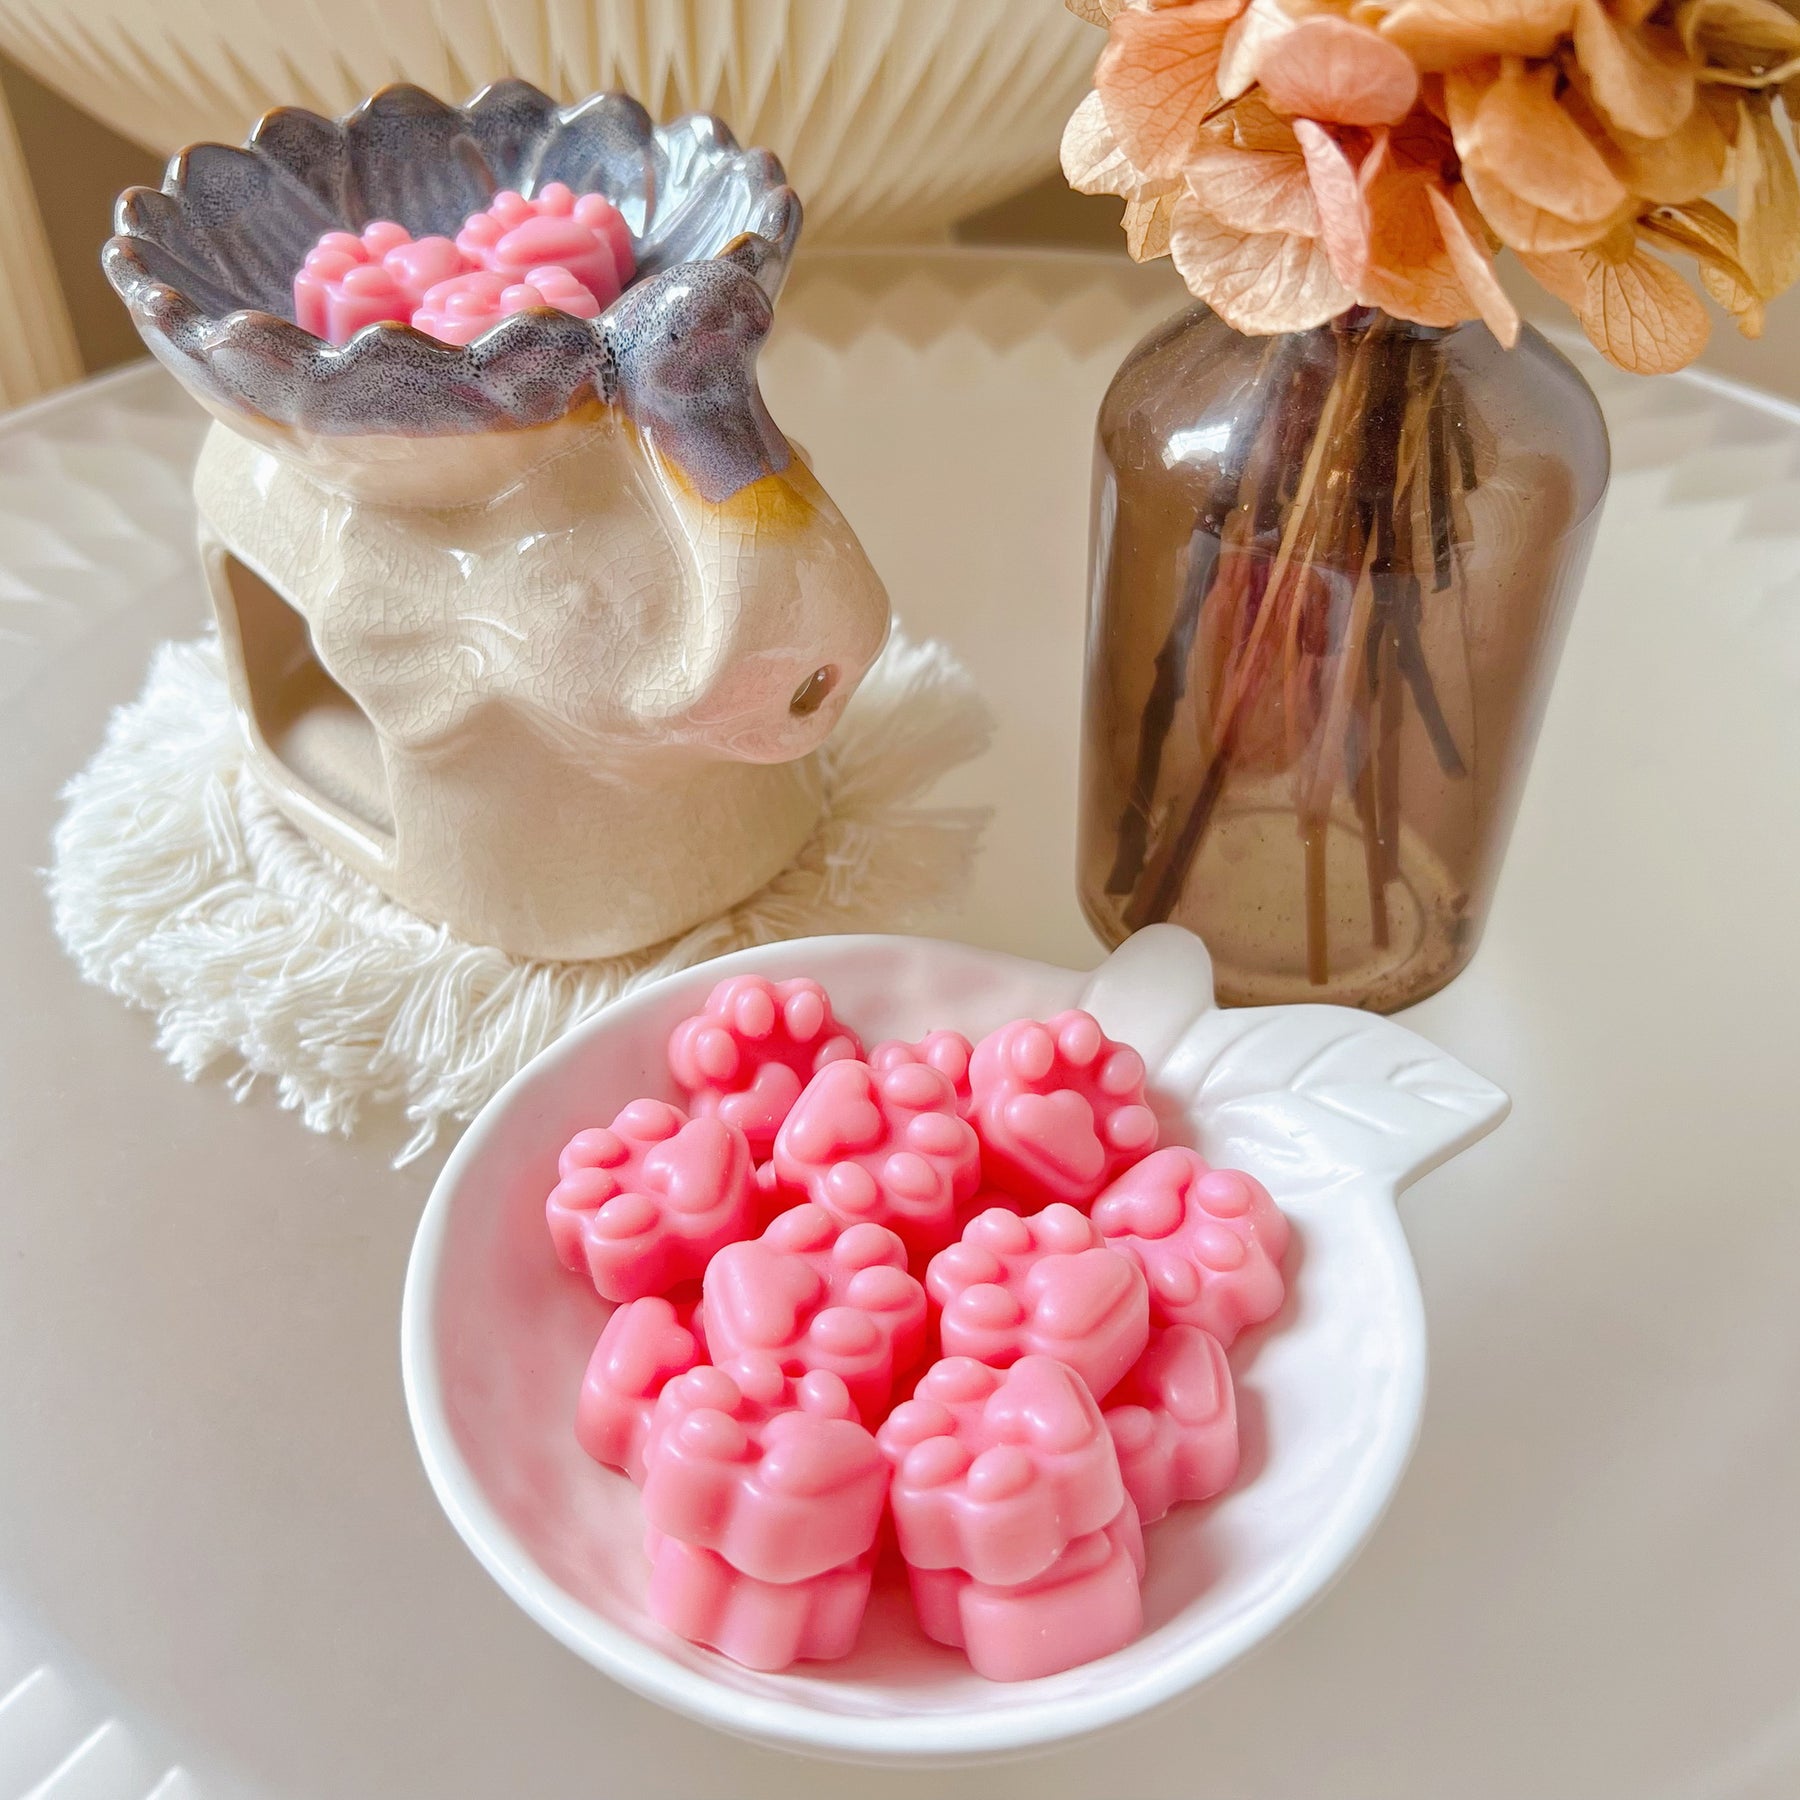 Pack of 20 cute paw-shaped soy wax melts from LMJ Candles displayed on a decorative tray and elephant shaped wax warmer, highlighting the eco-friendly and vegan qualities.